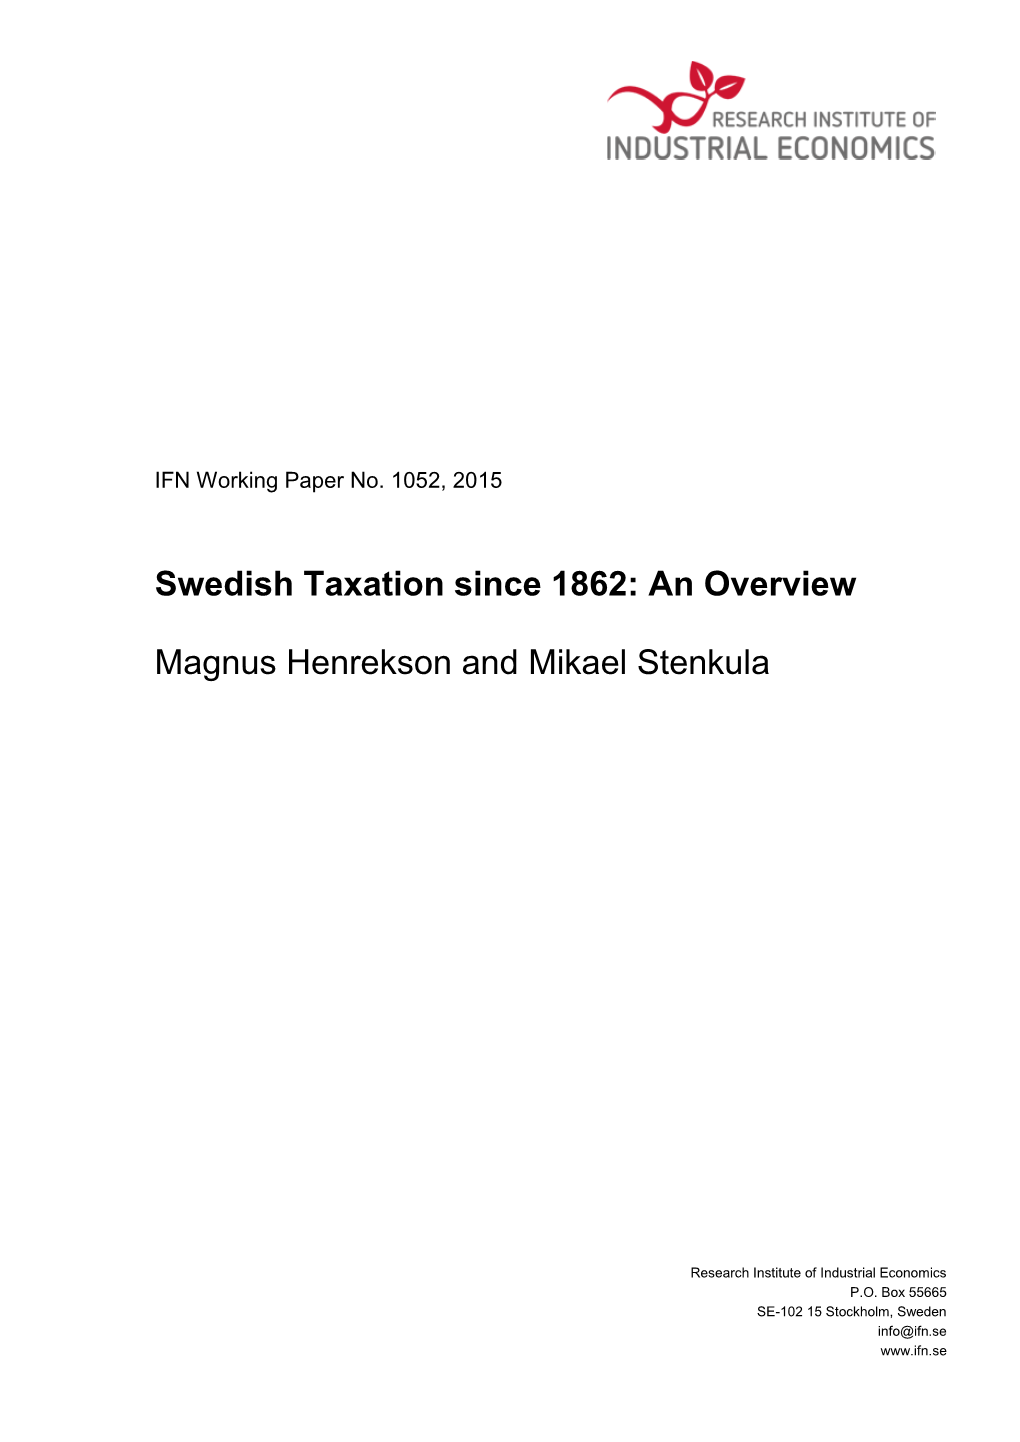 Swedish Taxation Since 1862: an Overview Magnus Henrekson And